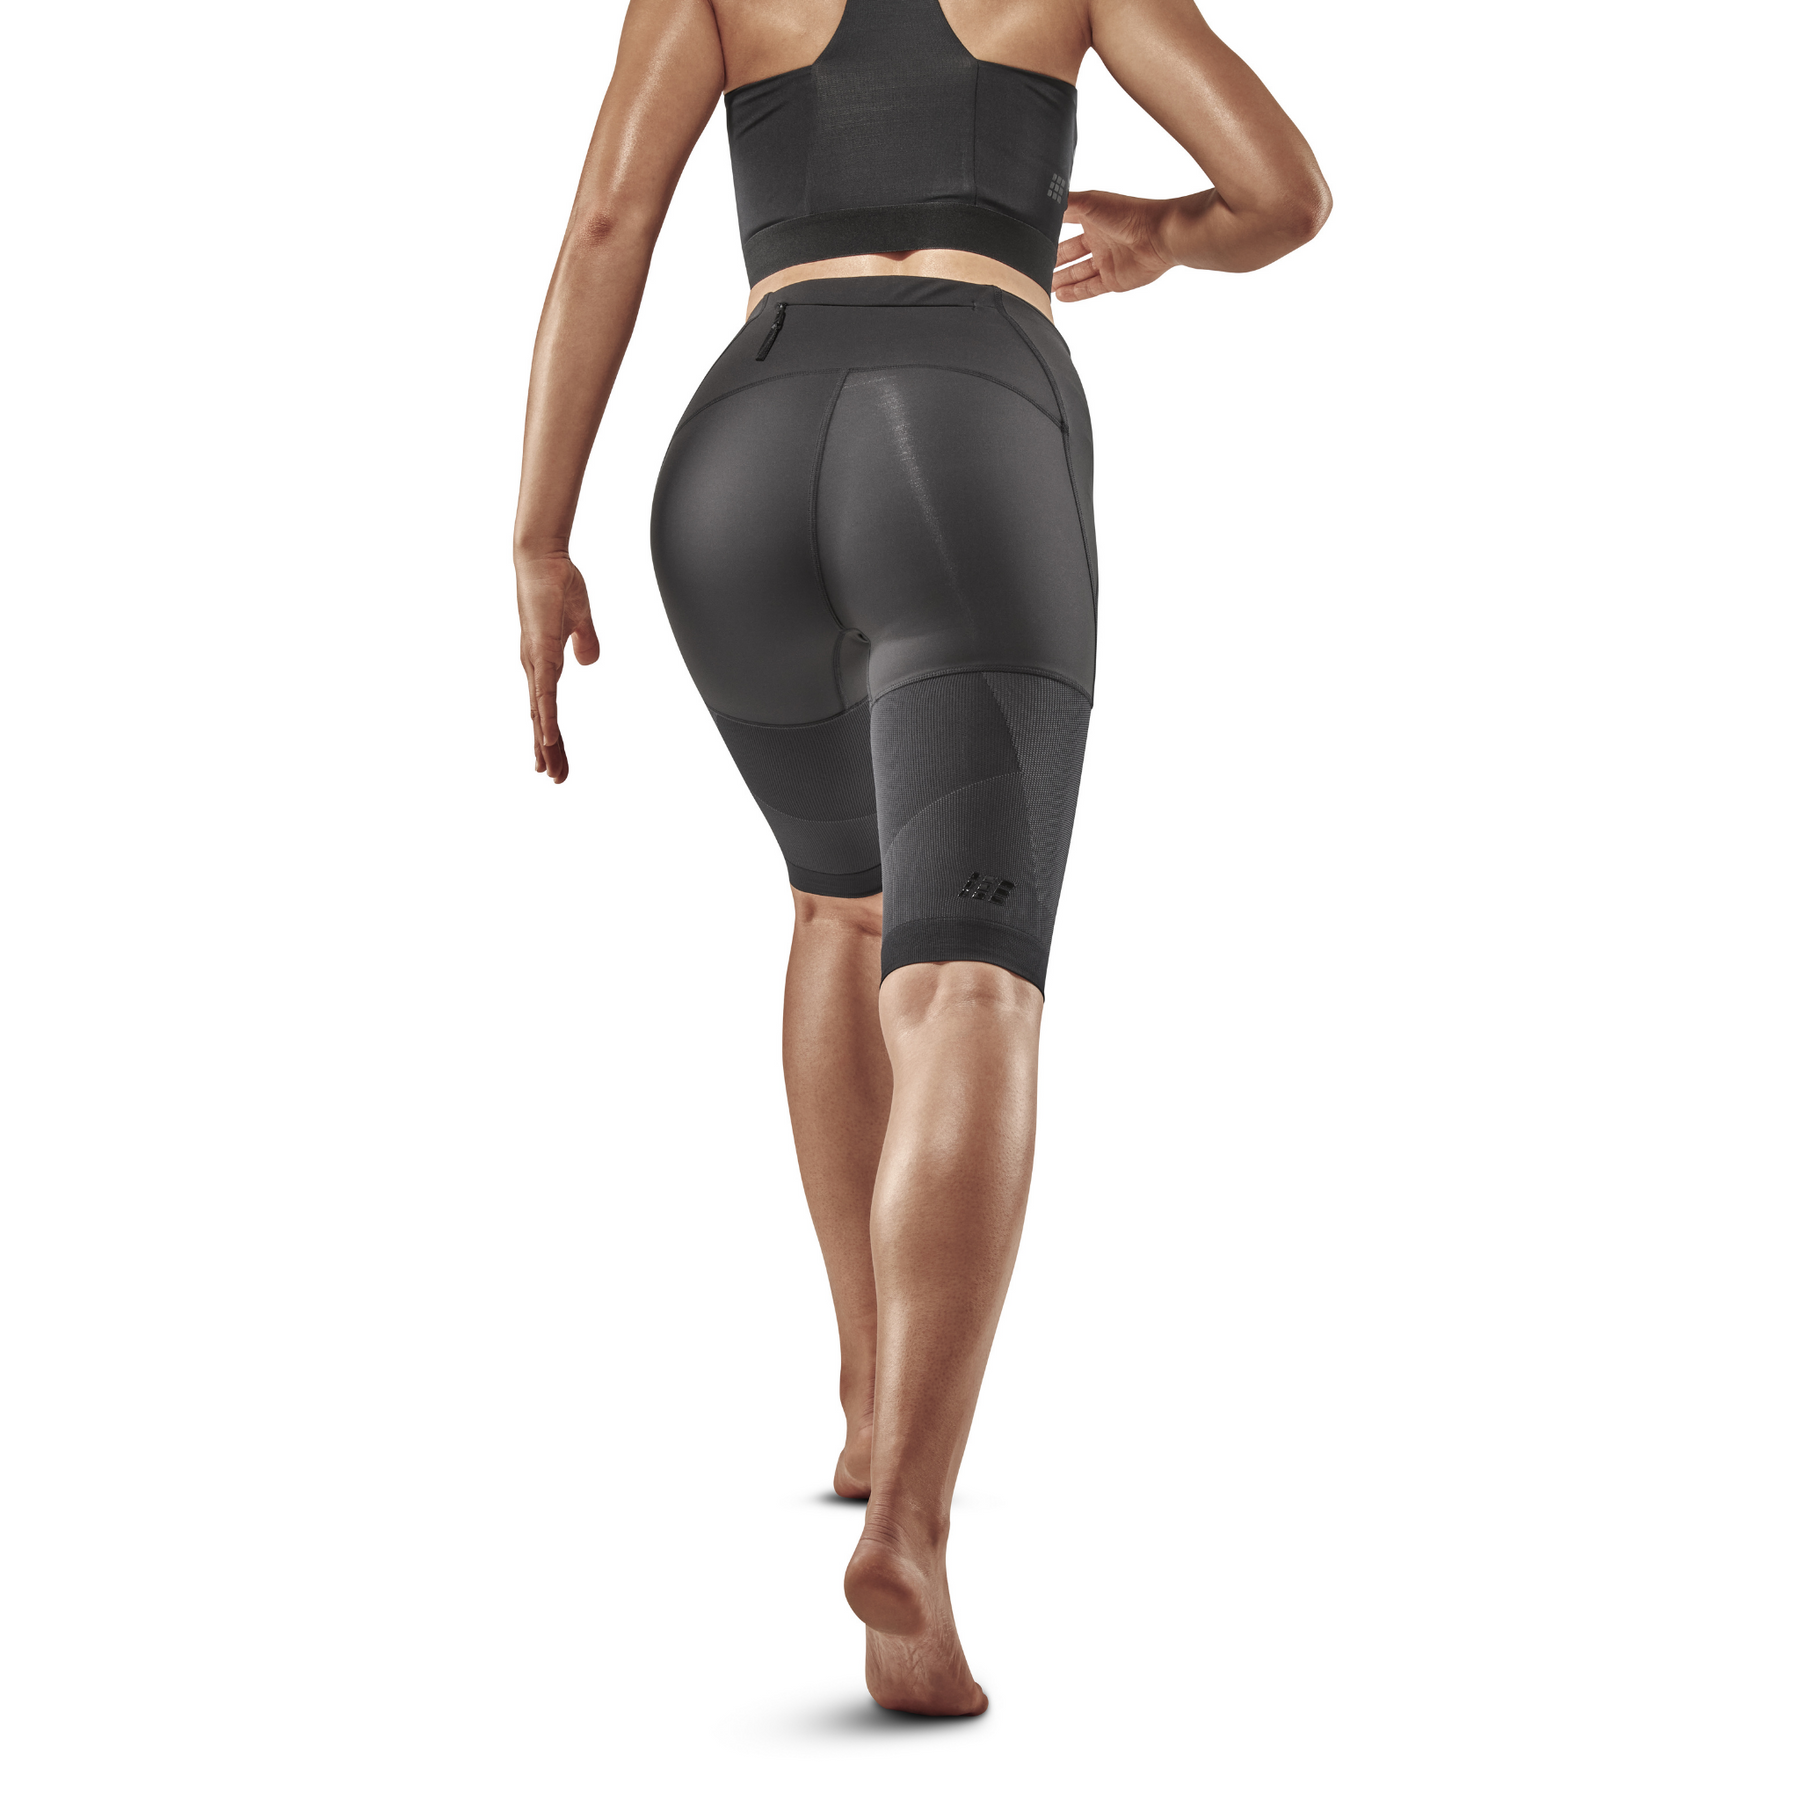 Compression Run Shorts 4.0 for CEP Women Activating CEP Sportswear – Compression 